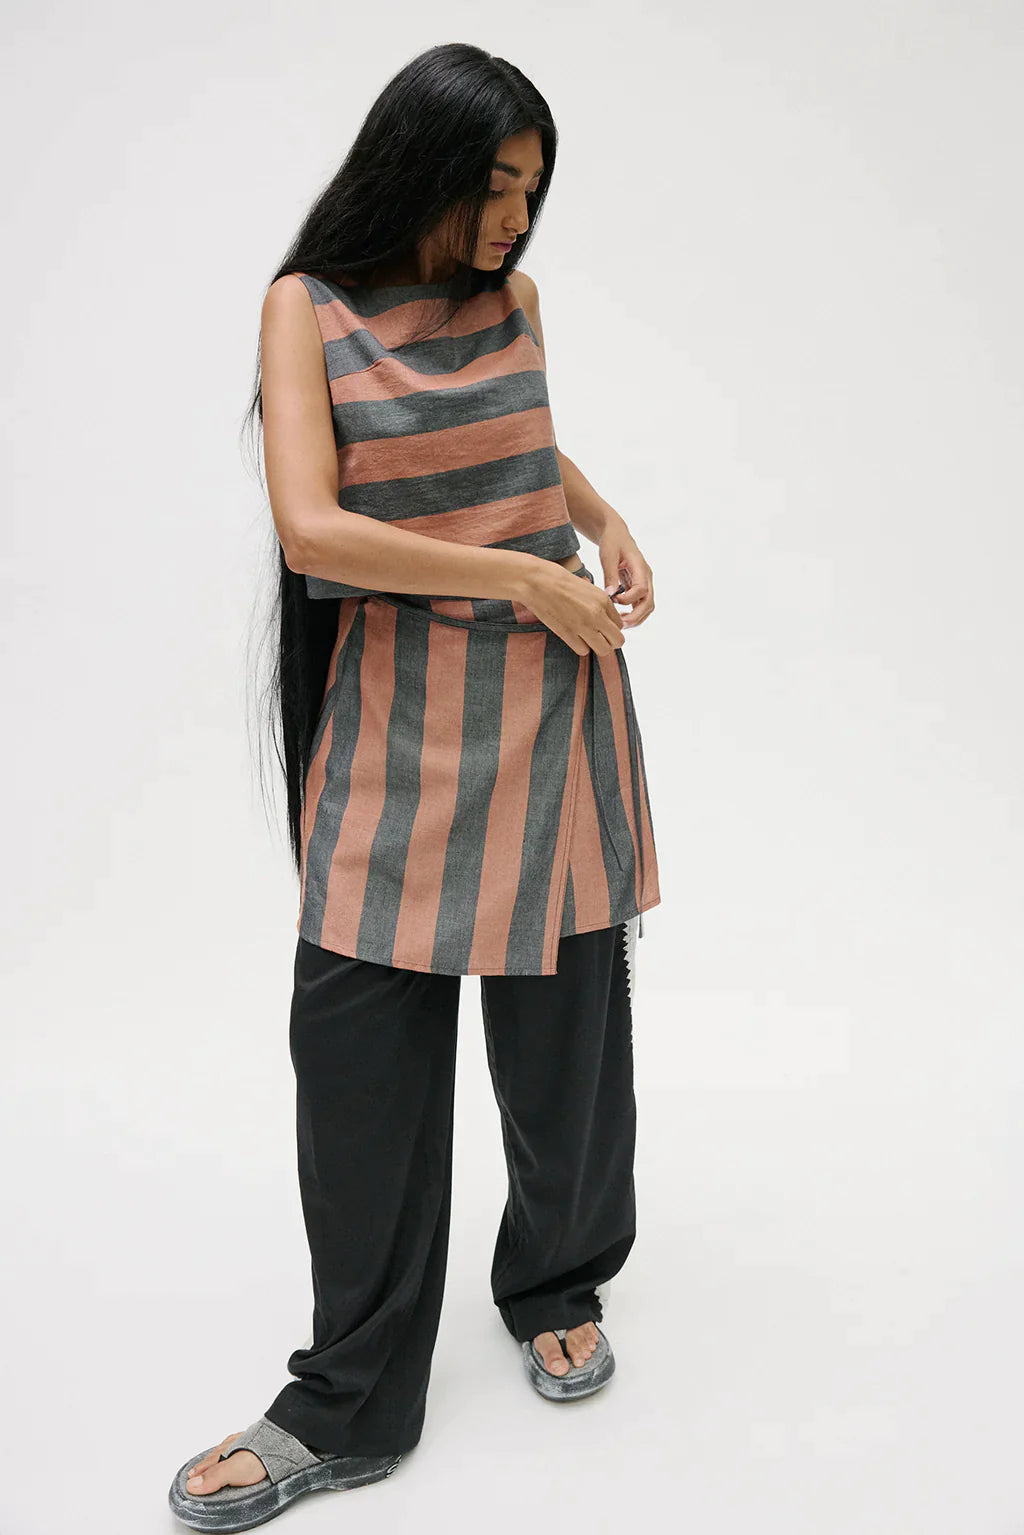 Muse The Label - Mida Top - Brown Stripe